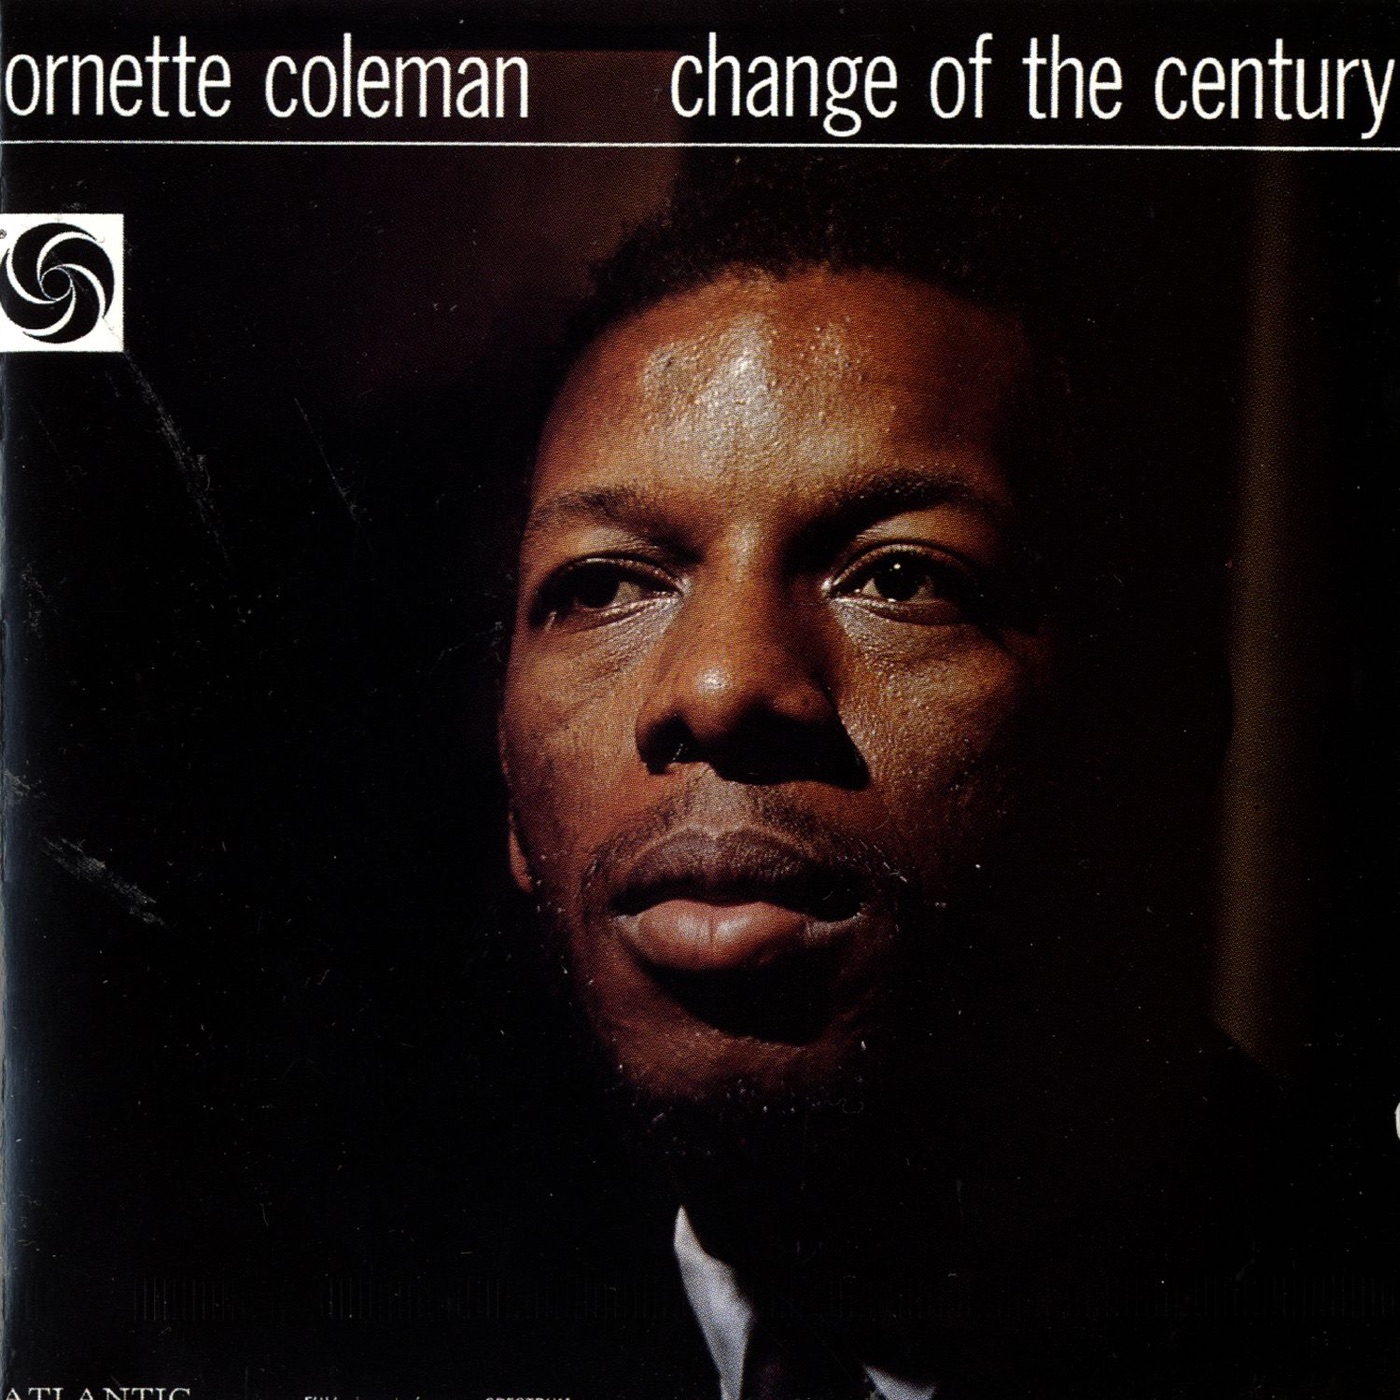 Change of the Century by Ornette Coleman